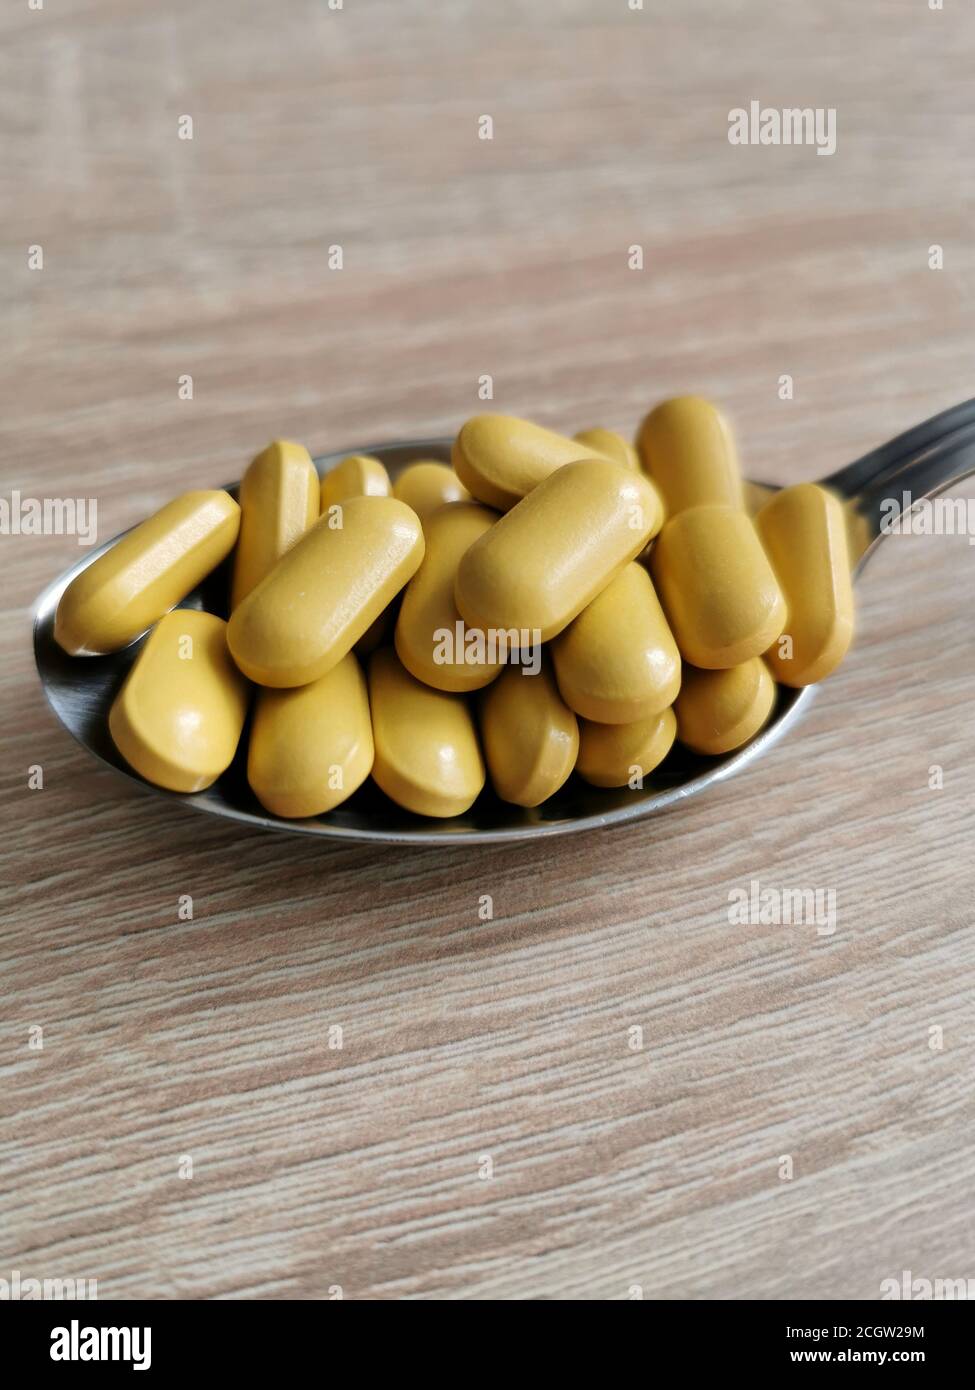 Spoon with yellow pills, dietary supplements on wooden table. Stock Photo